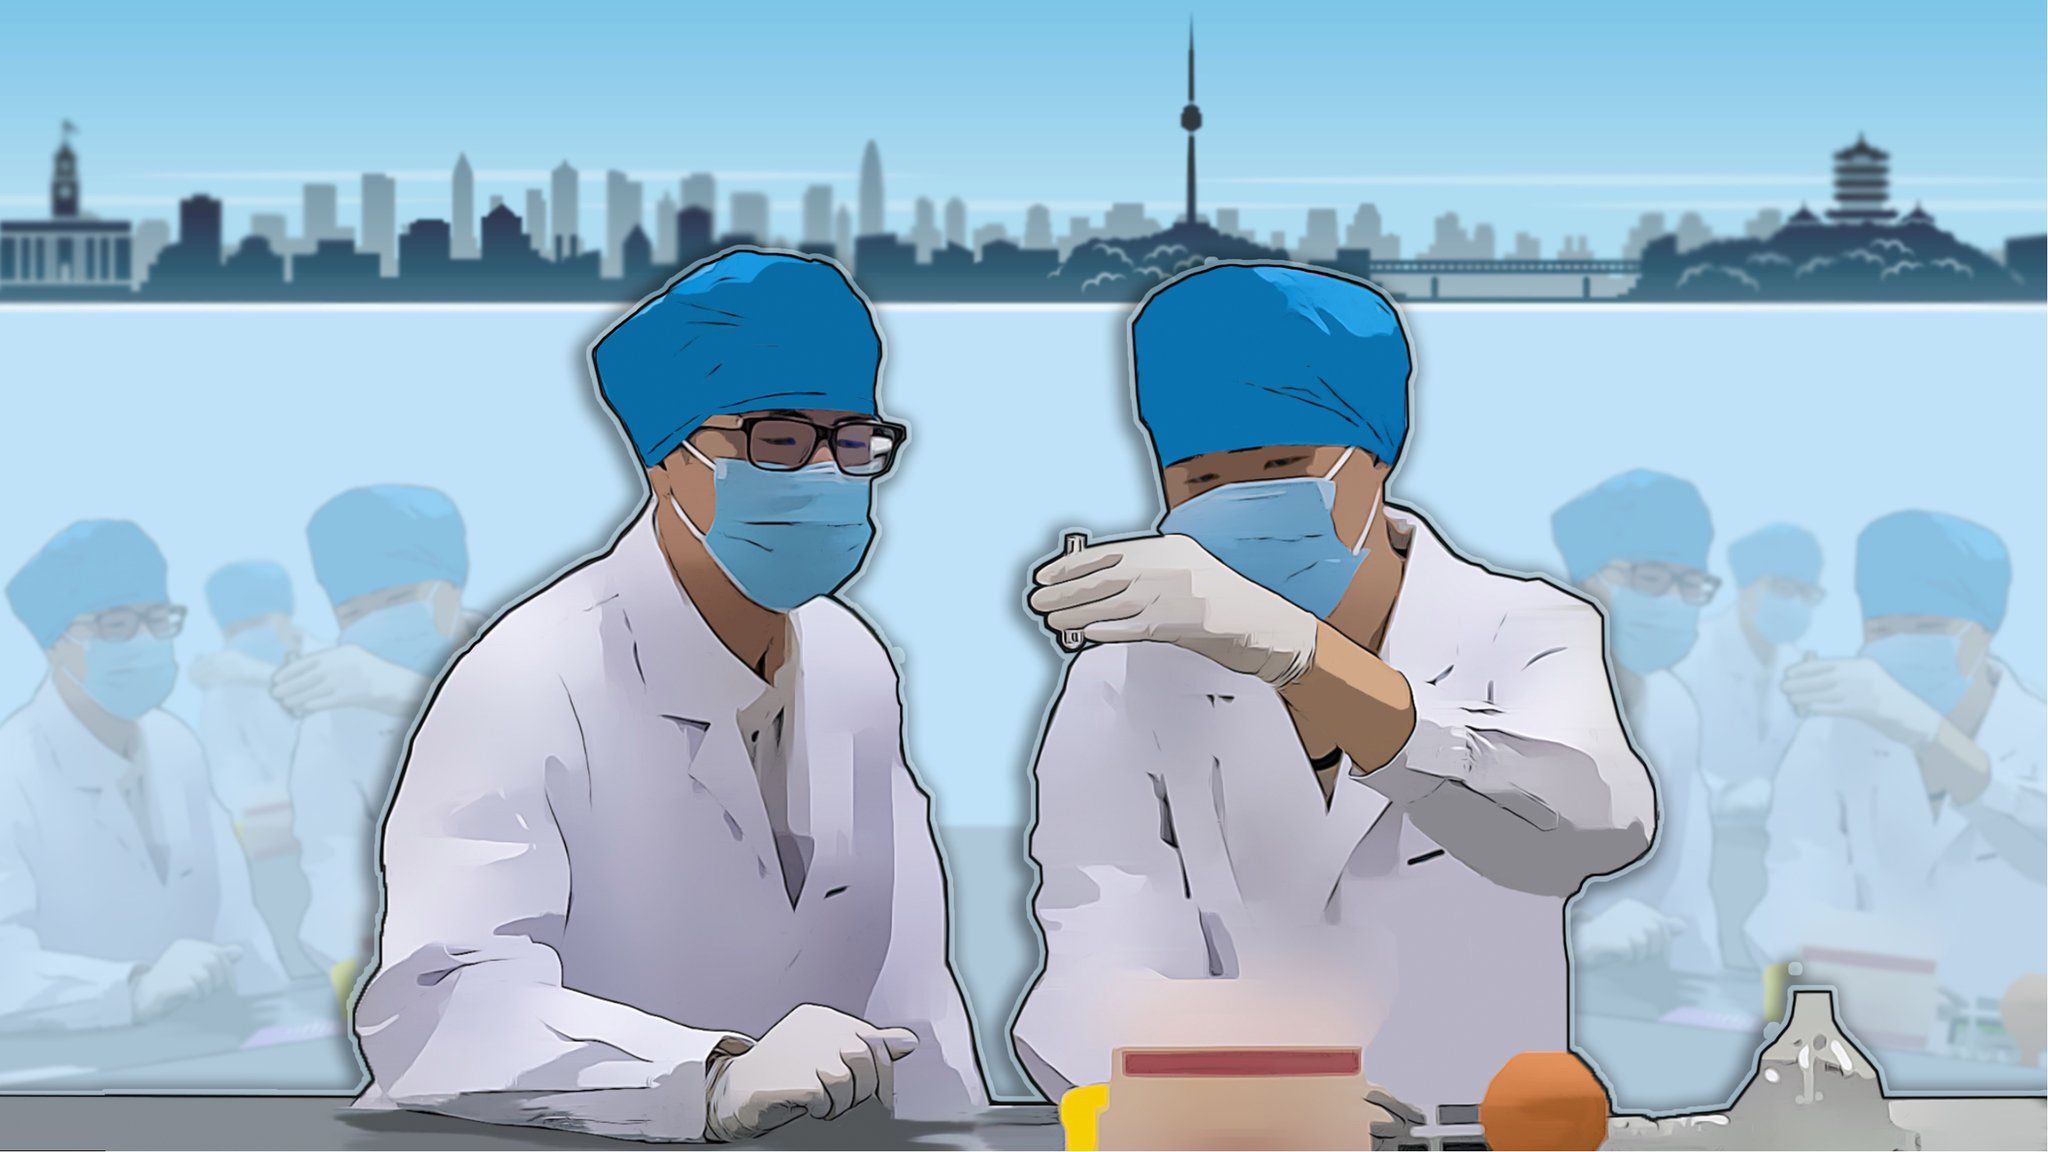 Artwork - scientists at work with Wuhan cityscape behind